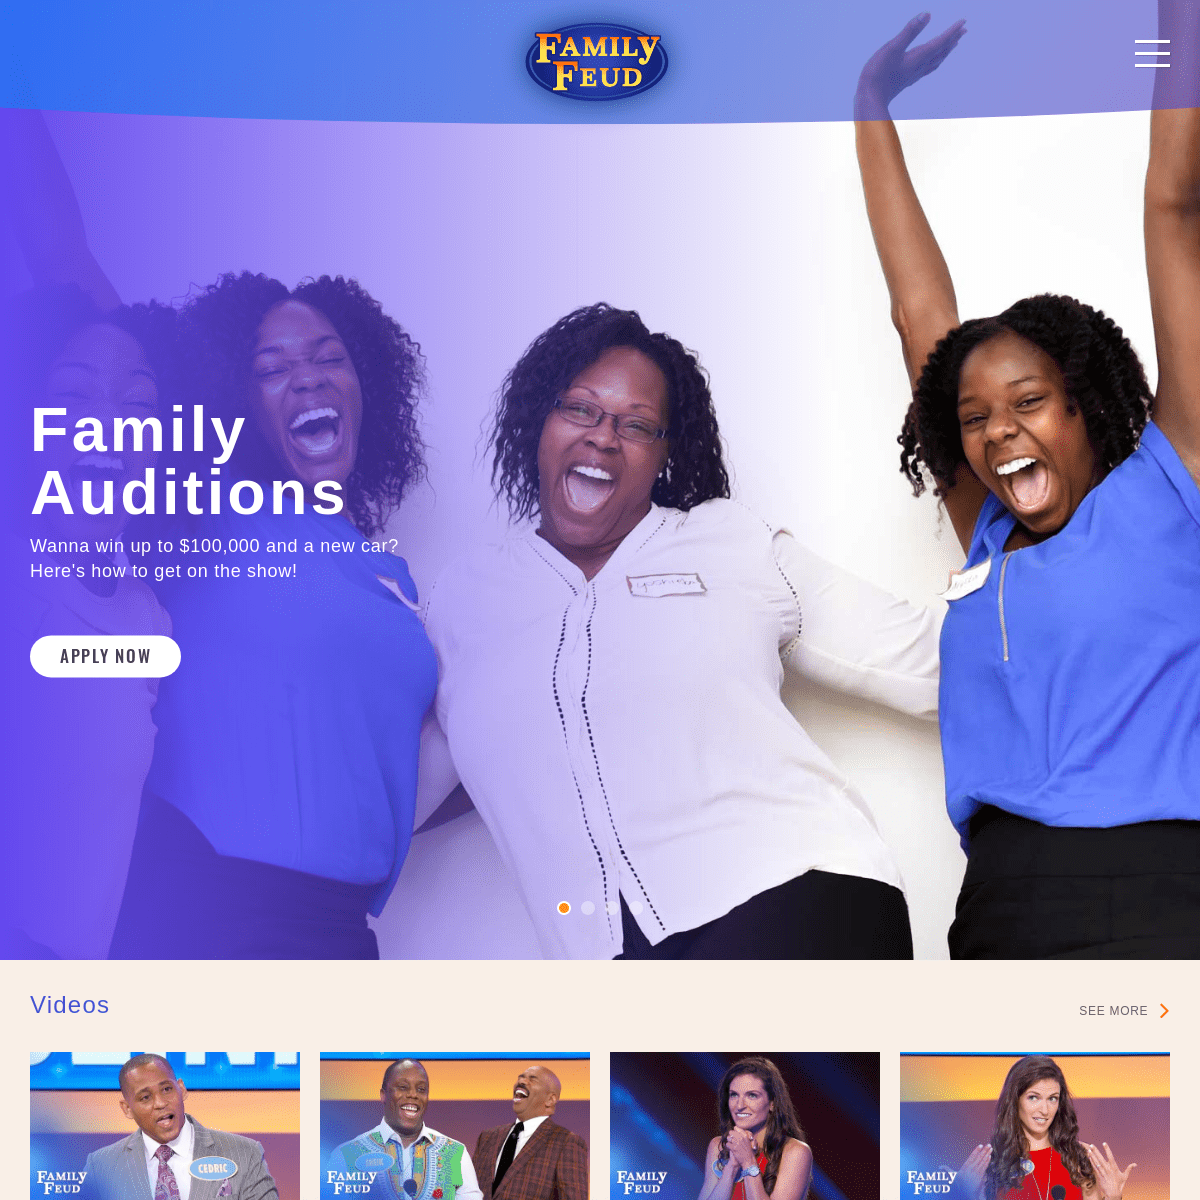 A complete backup of https://familyfeud.com